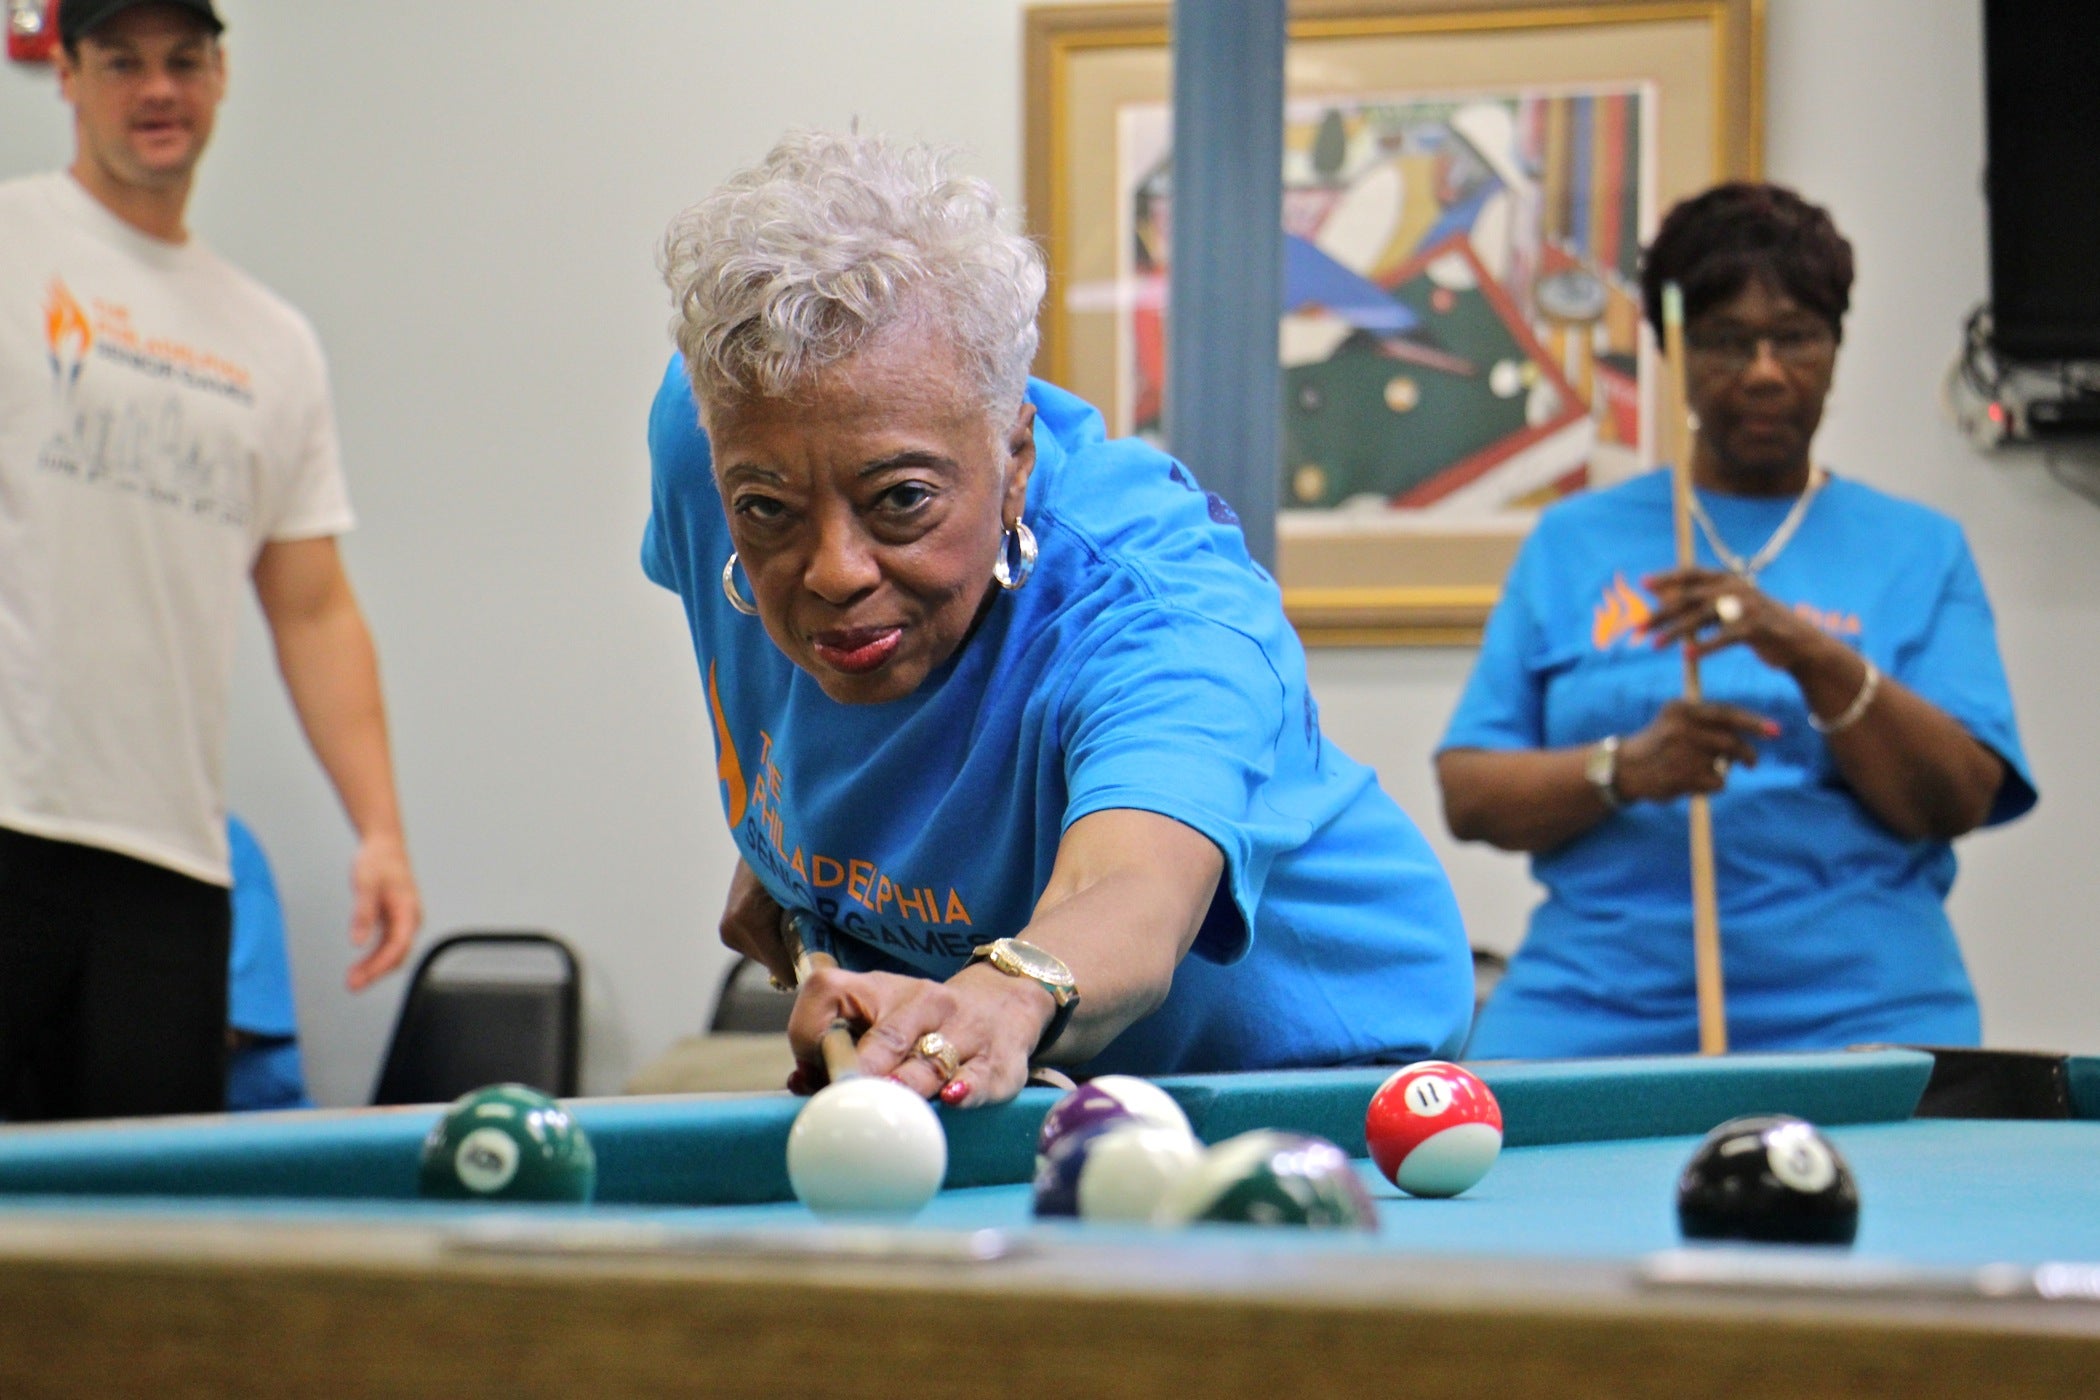 Philly Senior Citizens Compete In Olympics-Style Games - Whyy